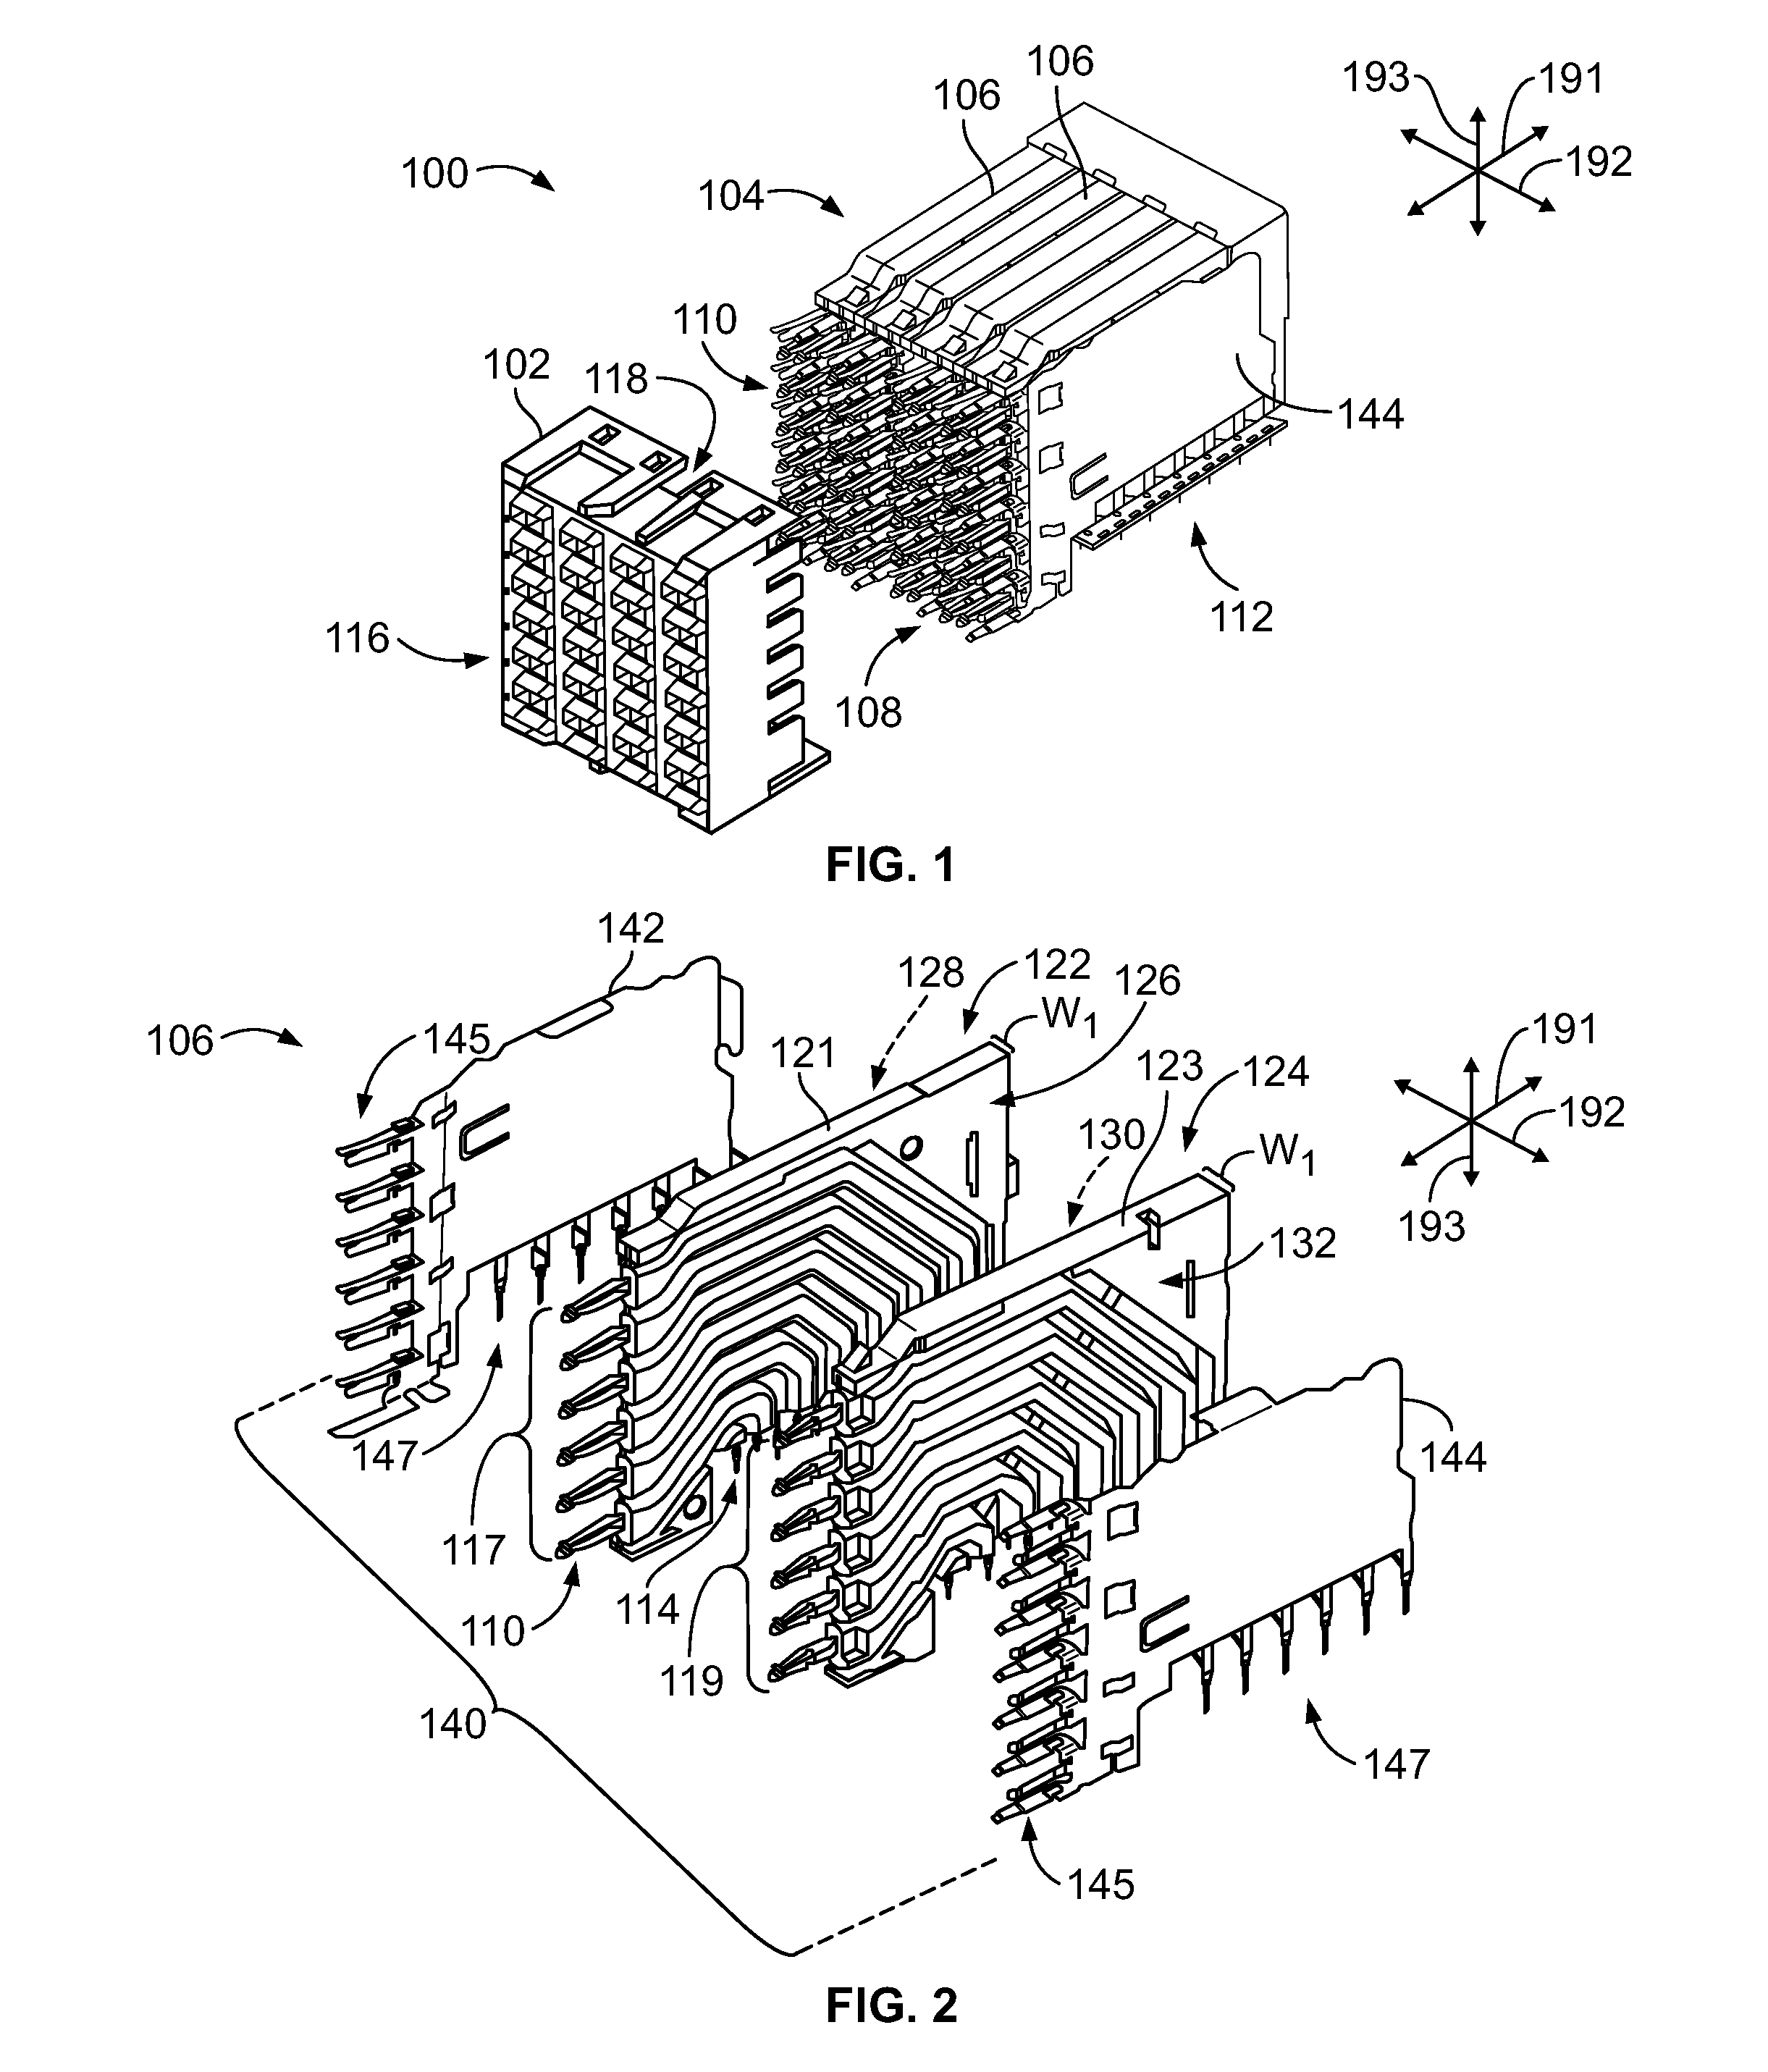 Electrical connector having shielded differential pairs